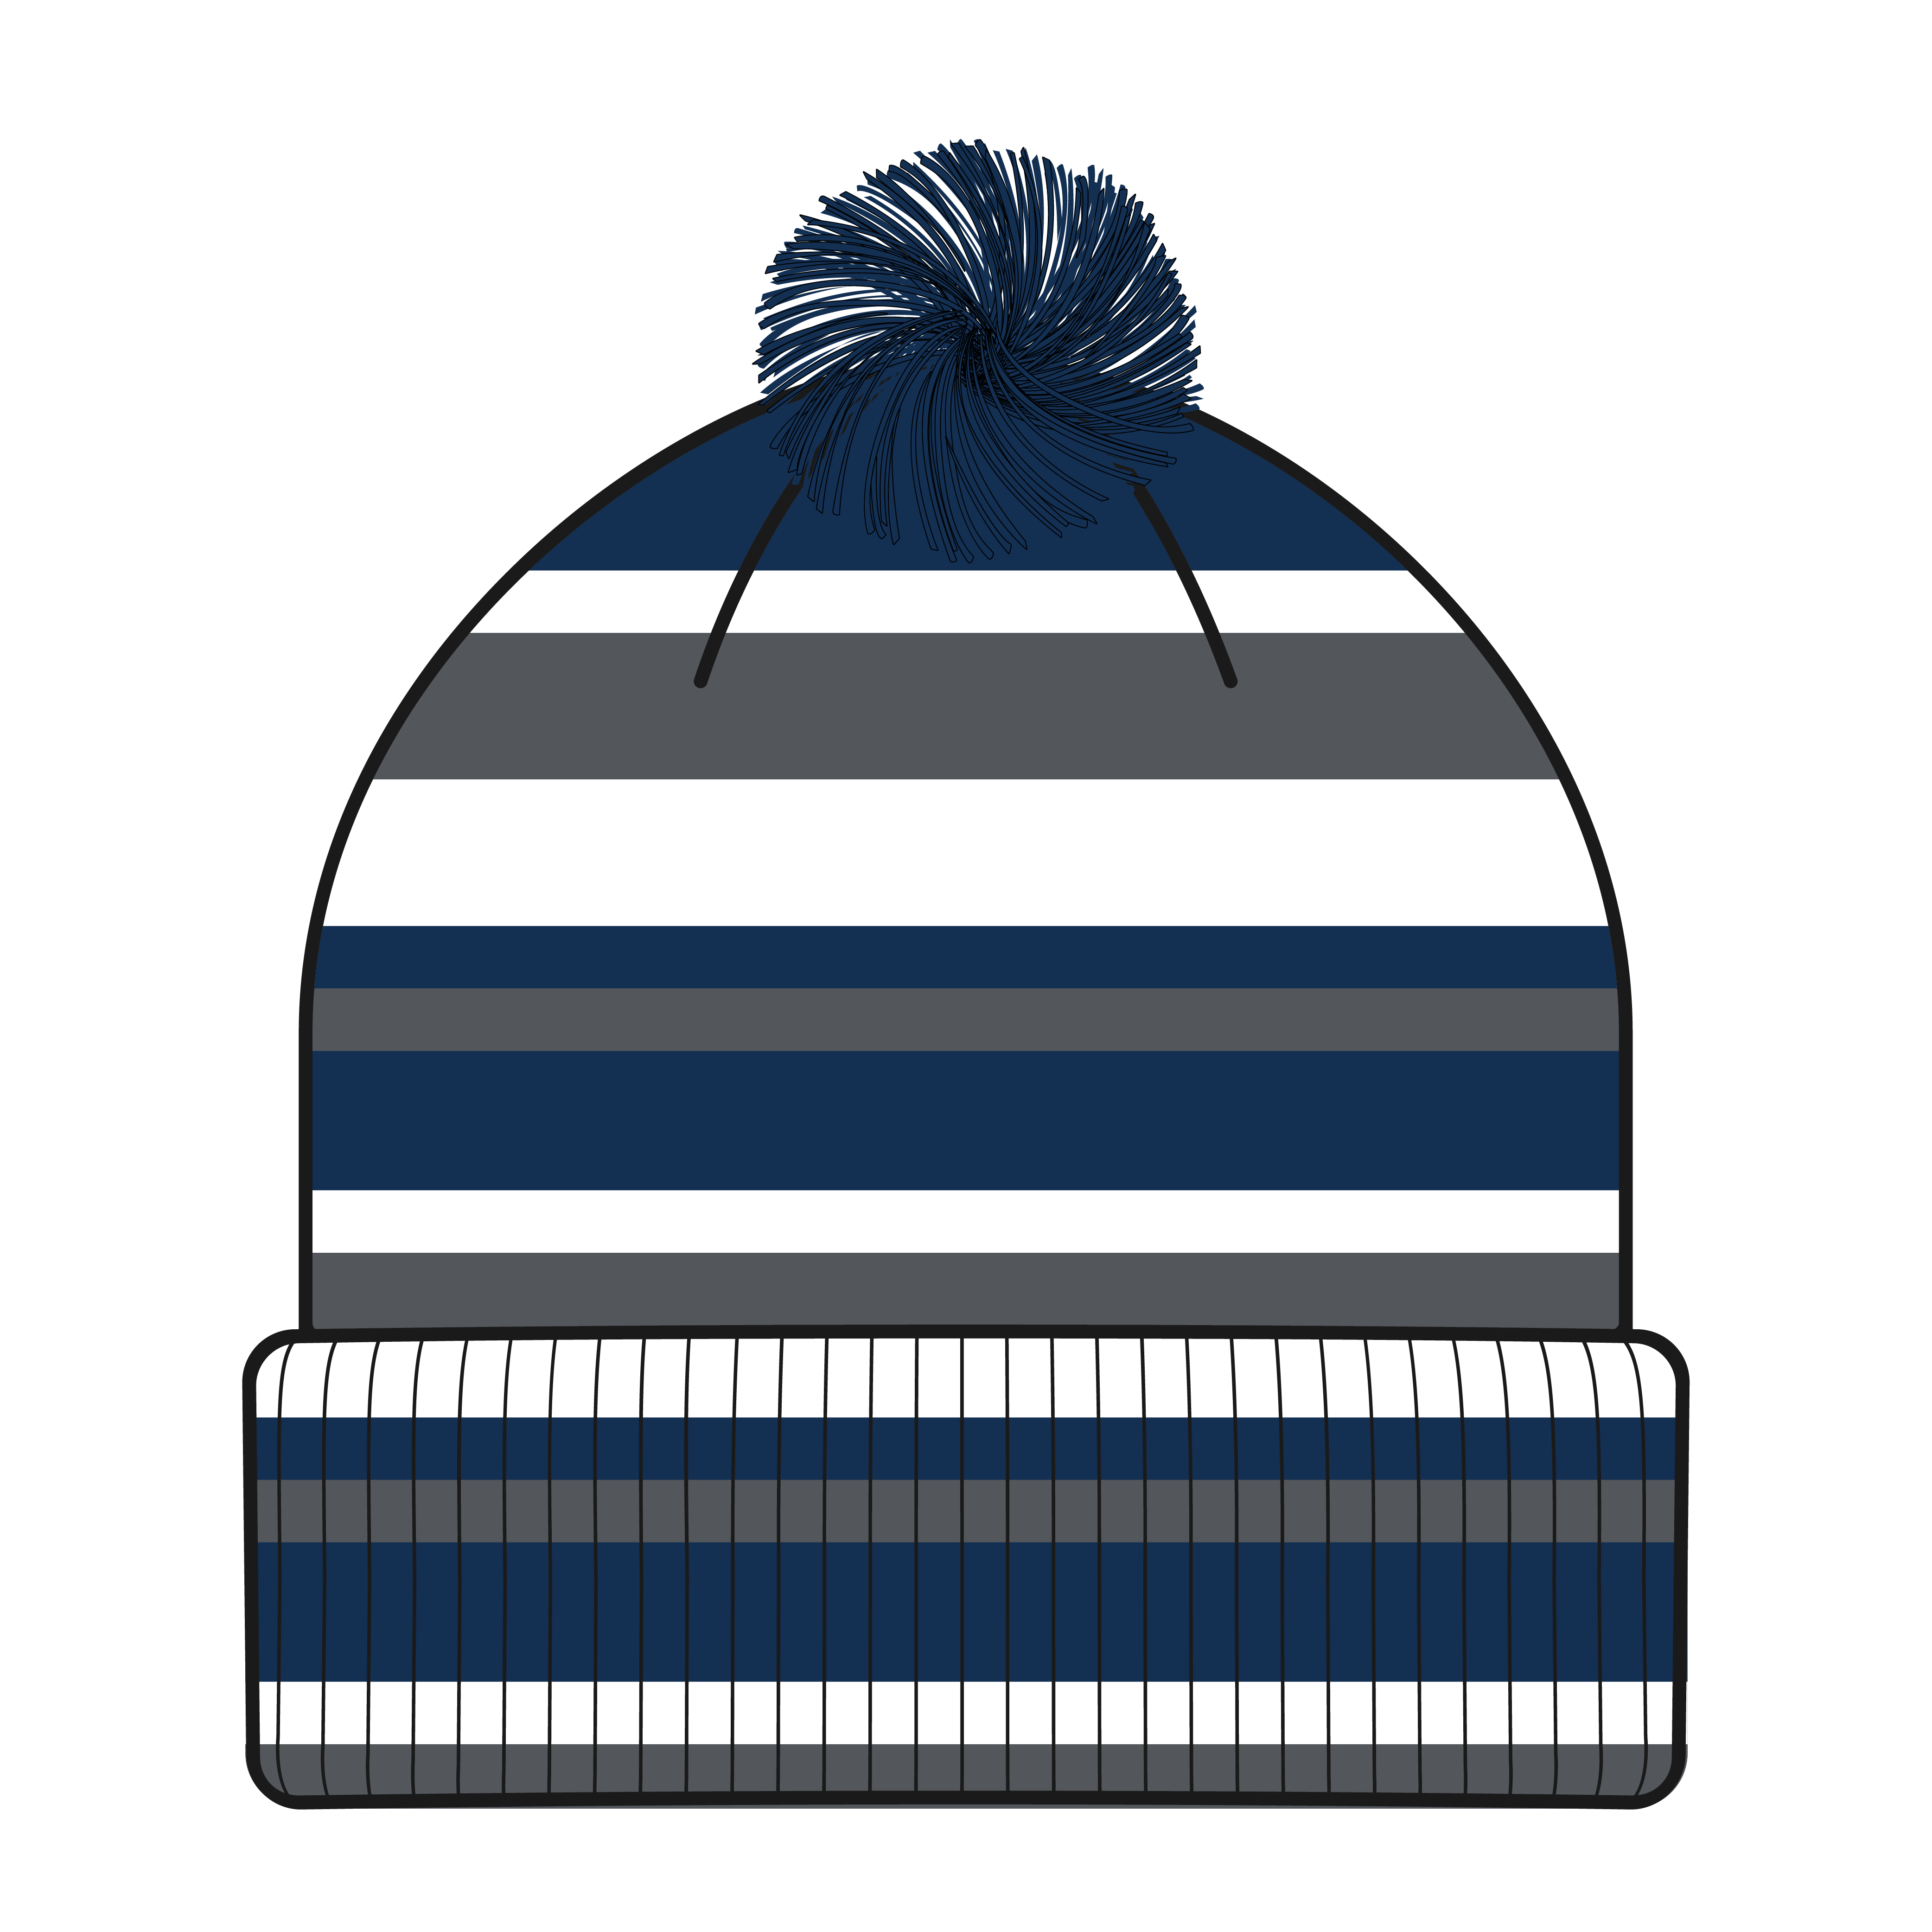 South East Crew Lacrosse Knit Beanie